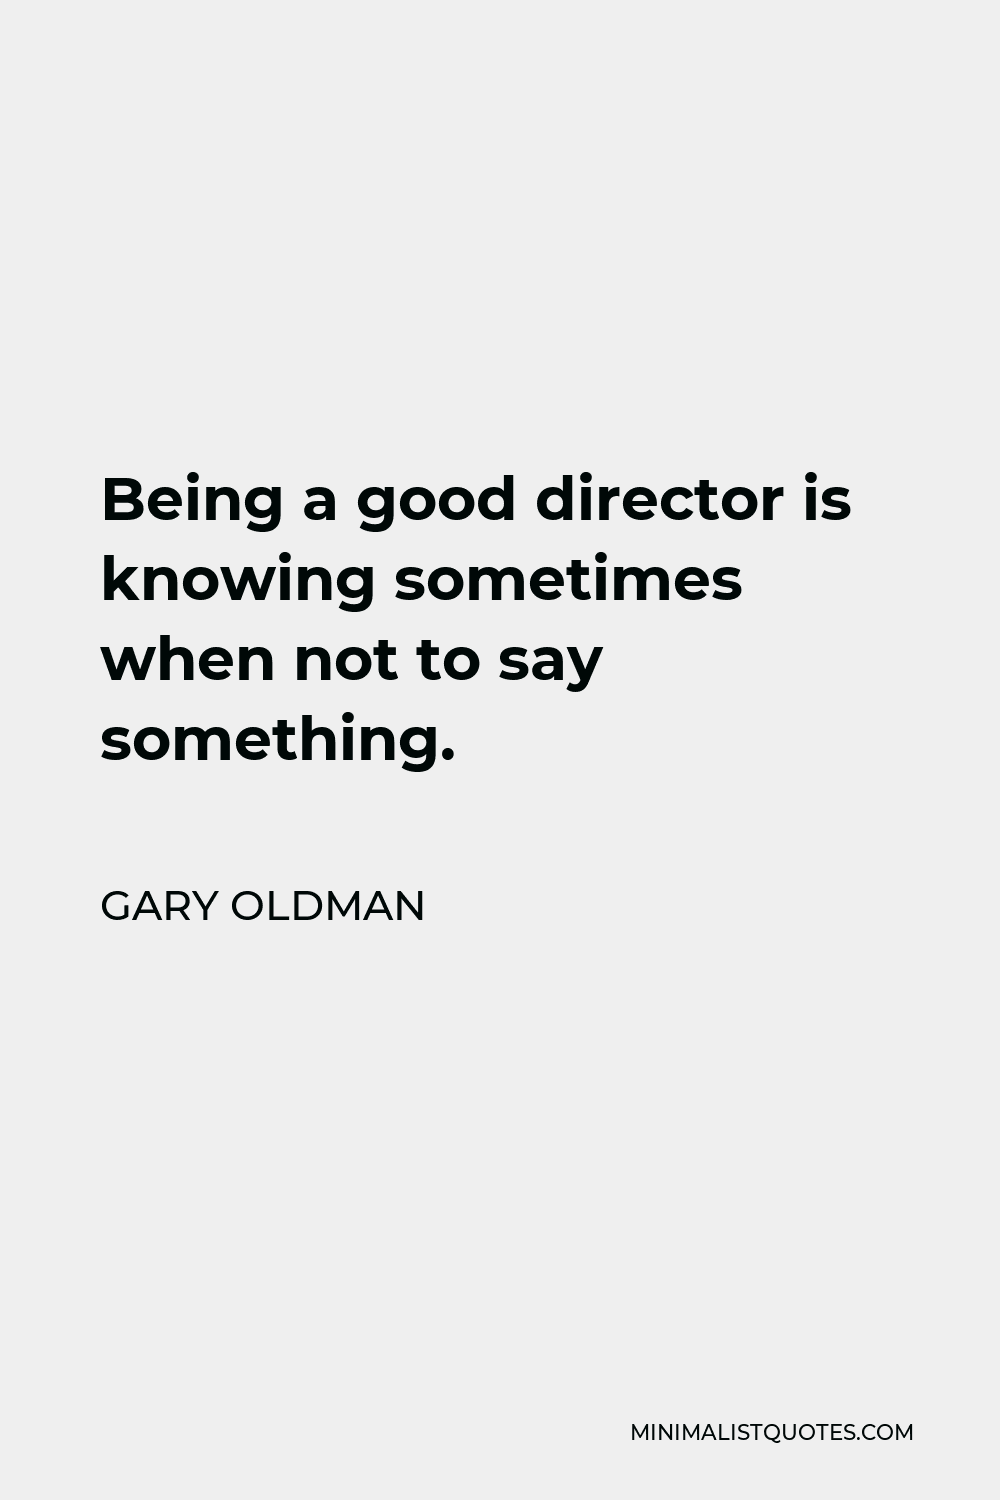 Gary Oldman Quote - Being a good director is knowing sometimes when not to say something.